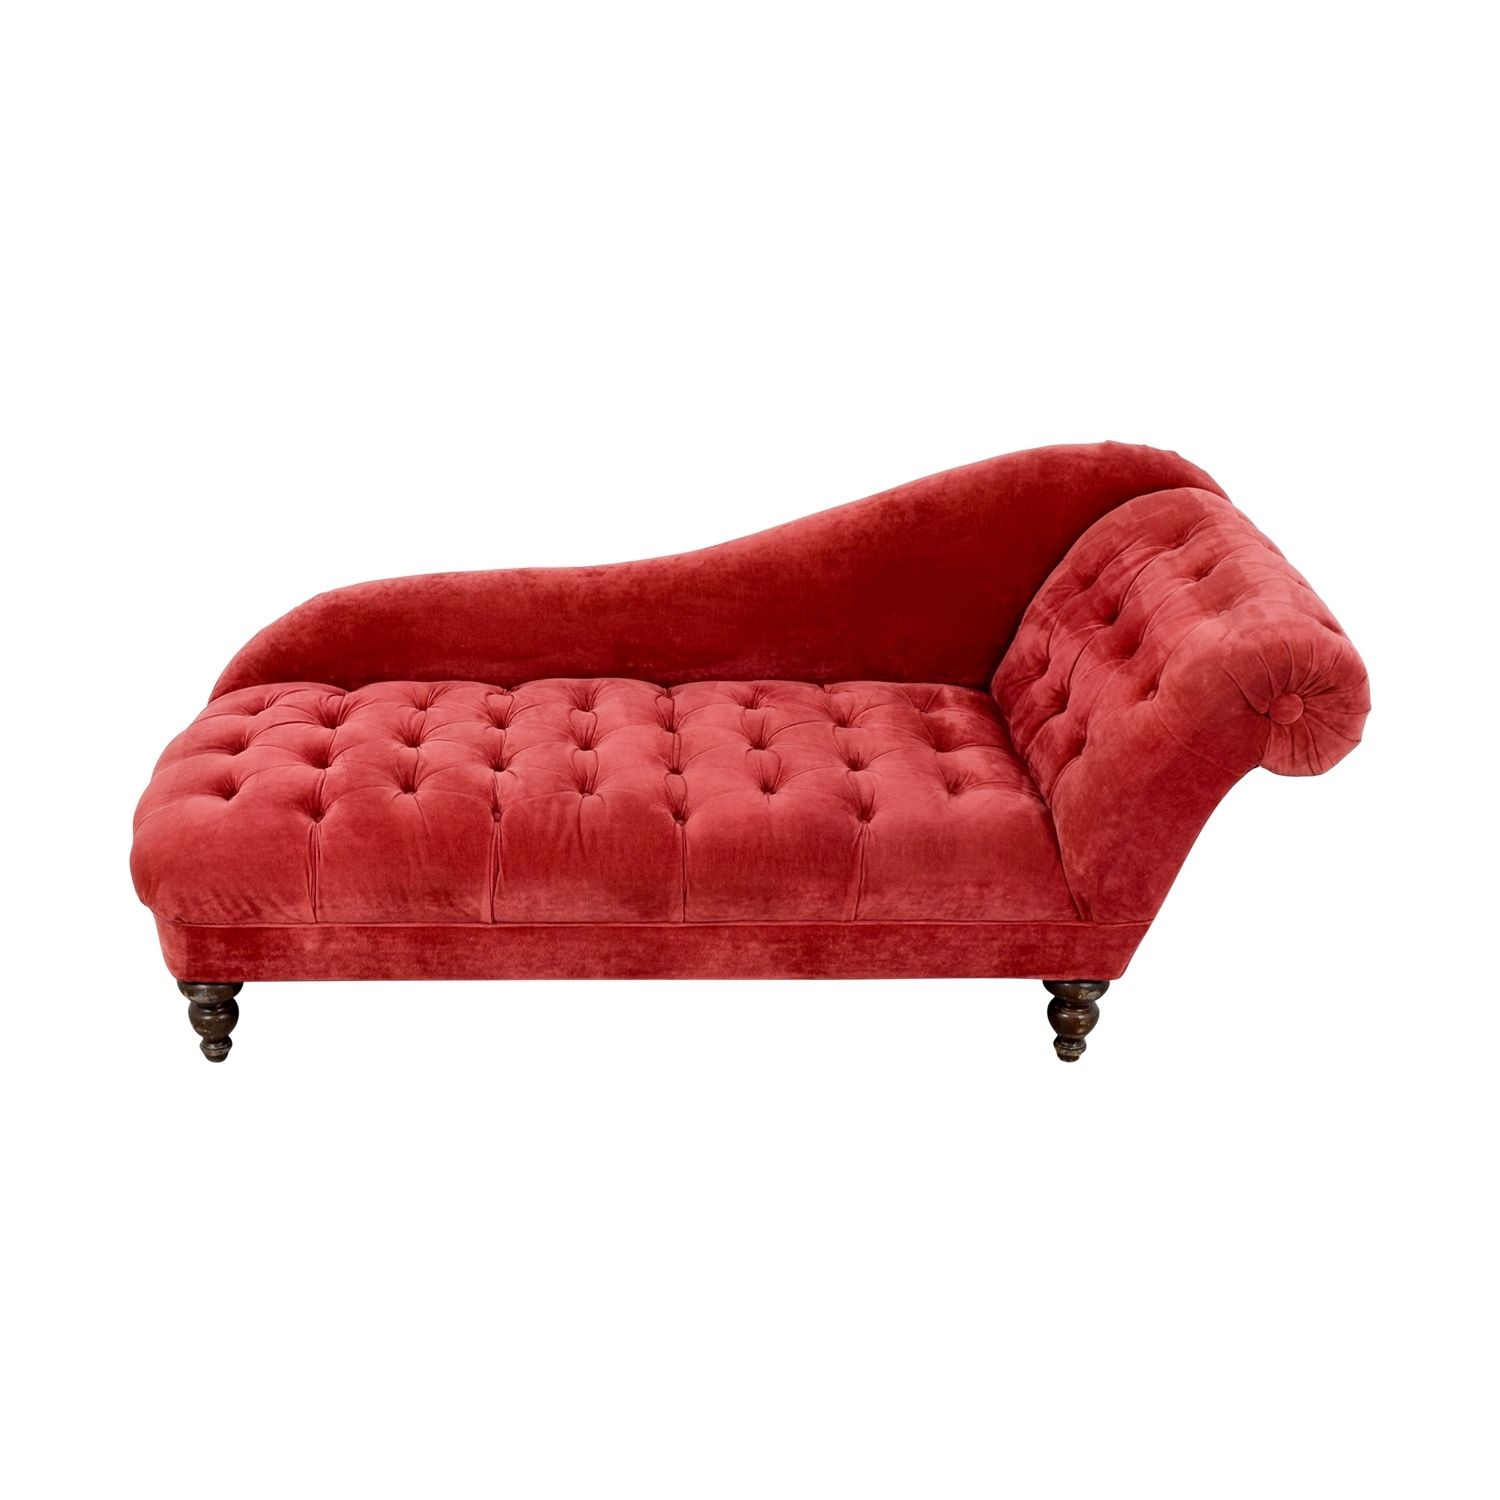 [%71% Off – Domain Home Furnishings Domain Home Furnishings Red Intended For Fashionable Red Chaises|red Chaises Throughout 2017 71% Off – Domain Home Furnishings Domain Home Furnishings Red|best And Newest Red Chaises Pertaining To 71% Off – Domain Home Furnishings Domain Home Furnishings Red|2018 71% Off – Domain Home Furnishings Domain Home Furnishings Red Within Red Chaises%] (View 10 of 15)